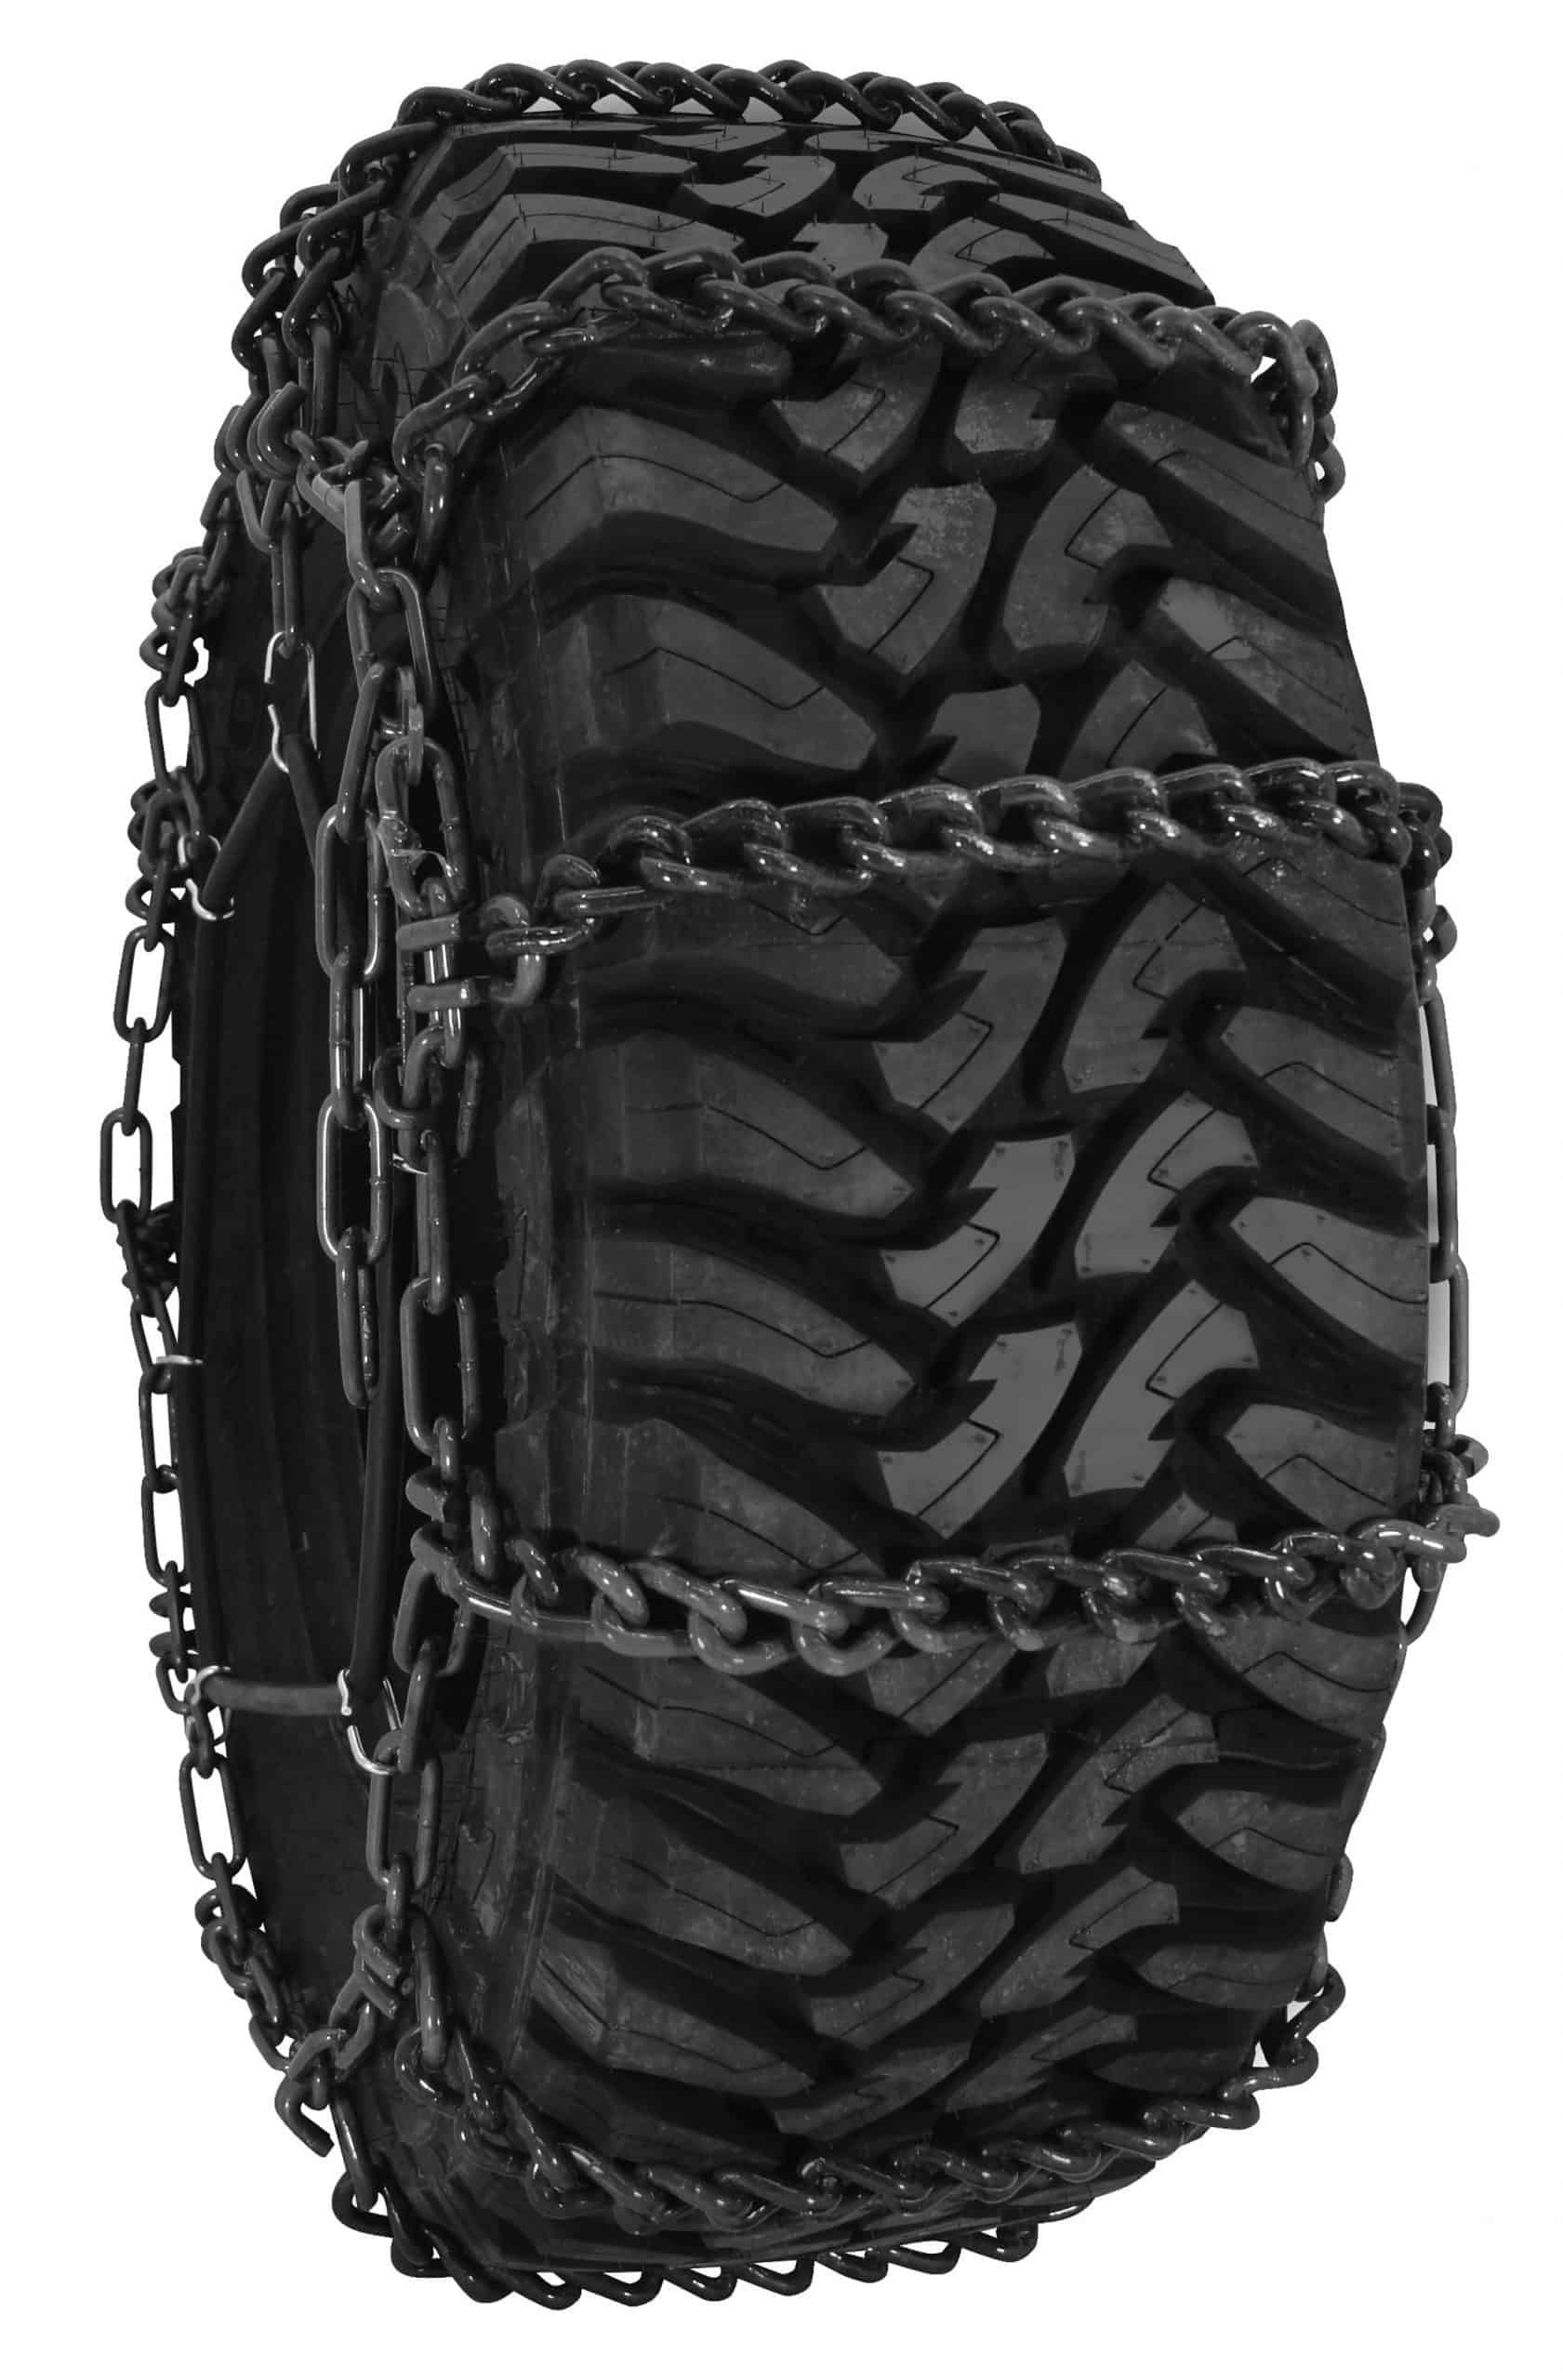 Peerless Chain Off Road Use Forklift Tire Chains, #1196055